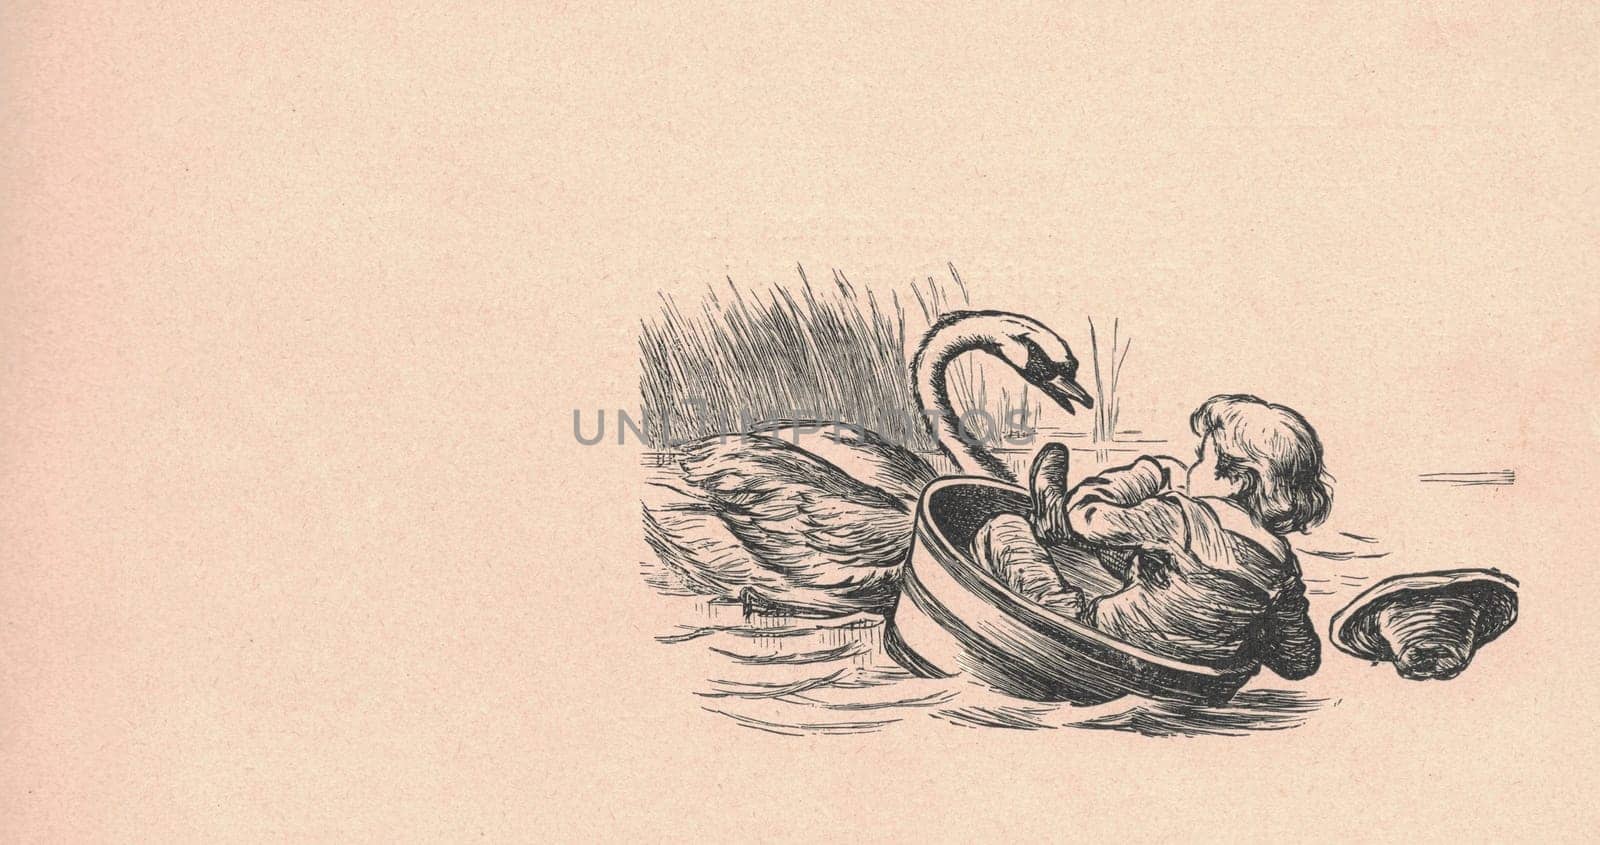 Black and white antique illustration shows a boy sails in the river. Vintage illustration shows the boy boy sits in the barrel and sails in the river. Old picture from fairy tale book. Storybook illustration published 1910. Oral storytelling is the earliest method for sharing narratives. During most people's childhoods, narratives are used to guide them on proper behavior, cultural history, formation of a communal identity, and values, as especially studied in anthropology today among traditional indigenous peoples.